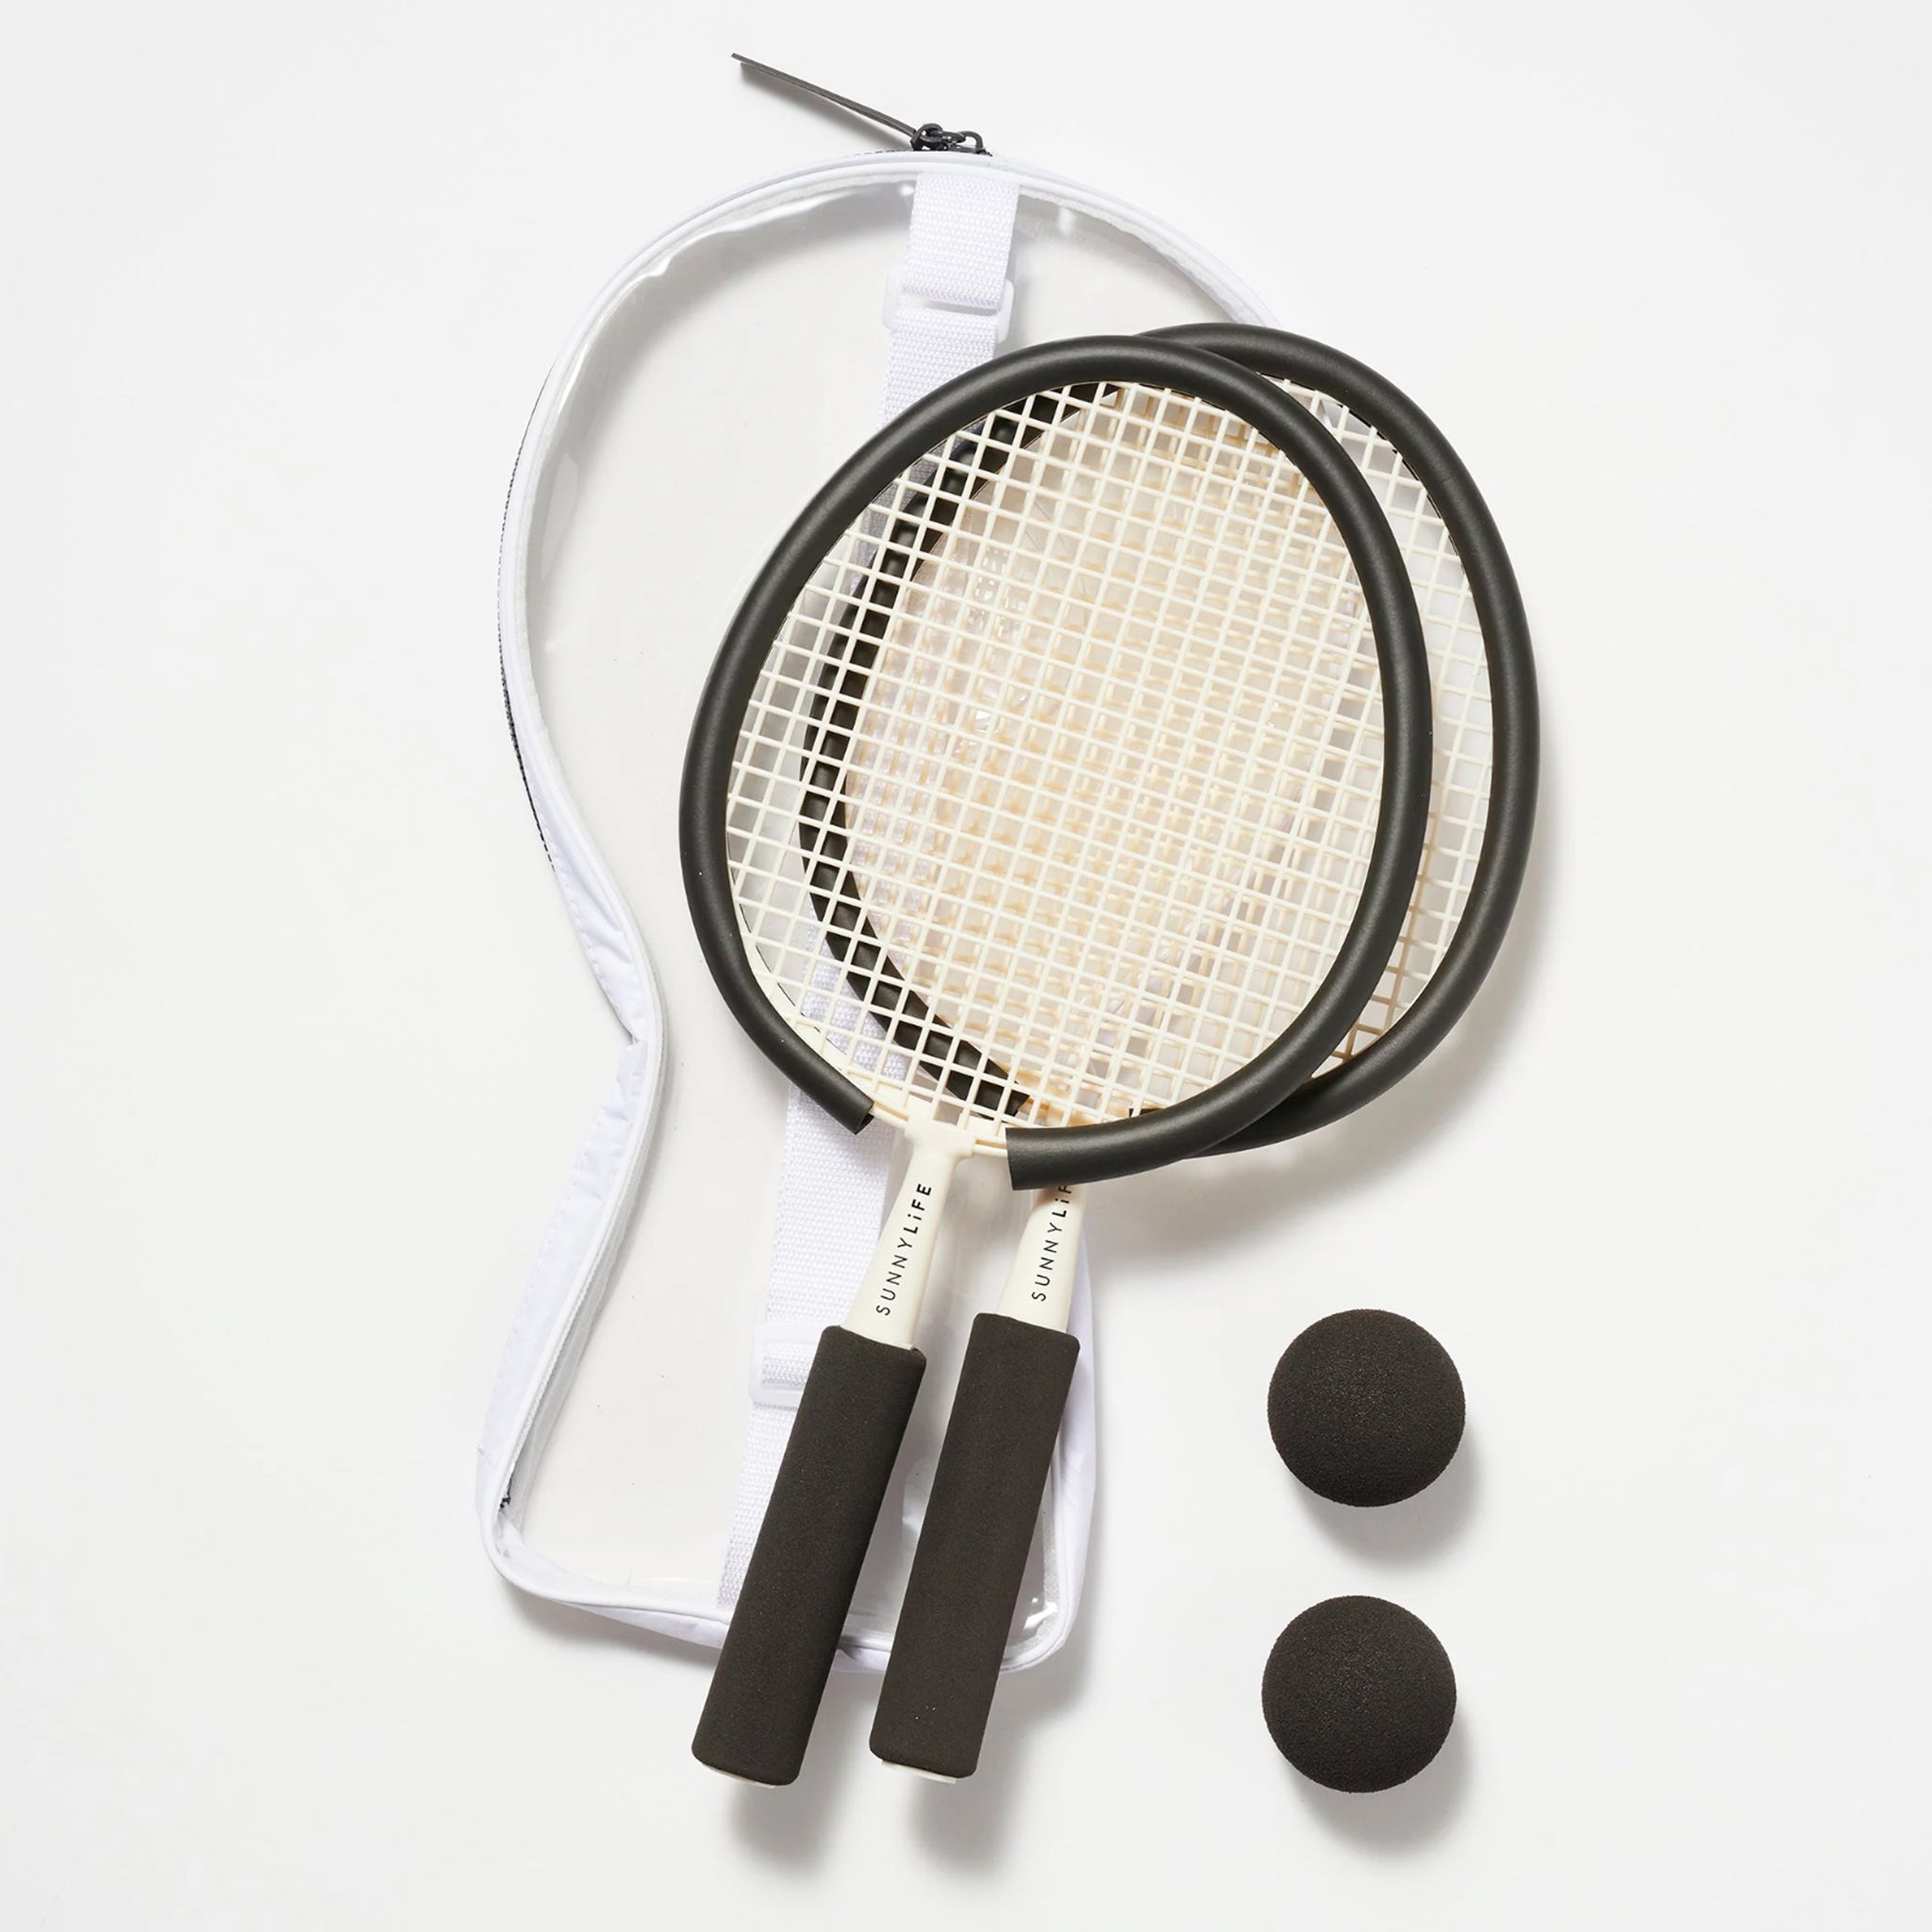 On a white background is two rackets with two balls.